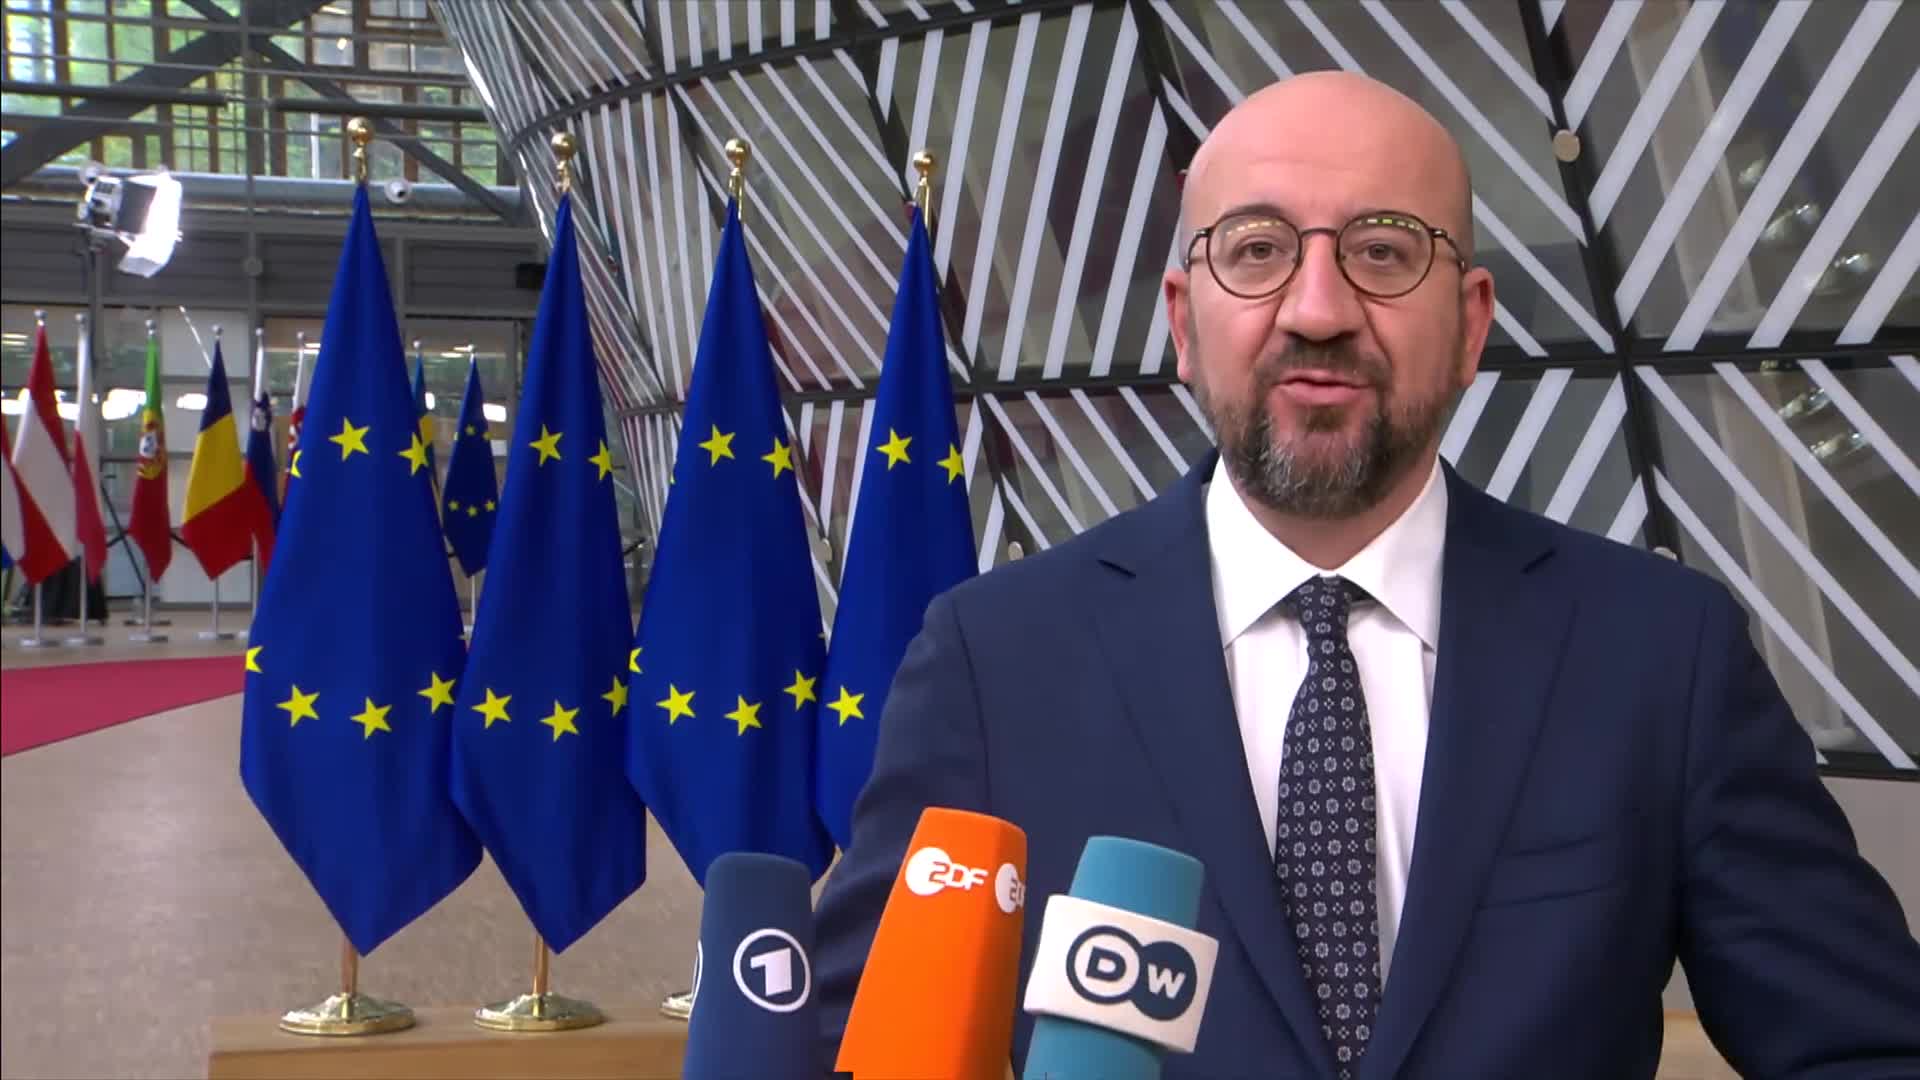 Video: Doorstep statement by Charles Michel, President of the European Council.